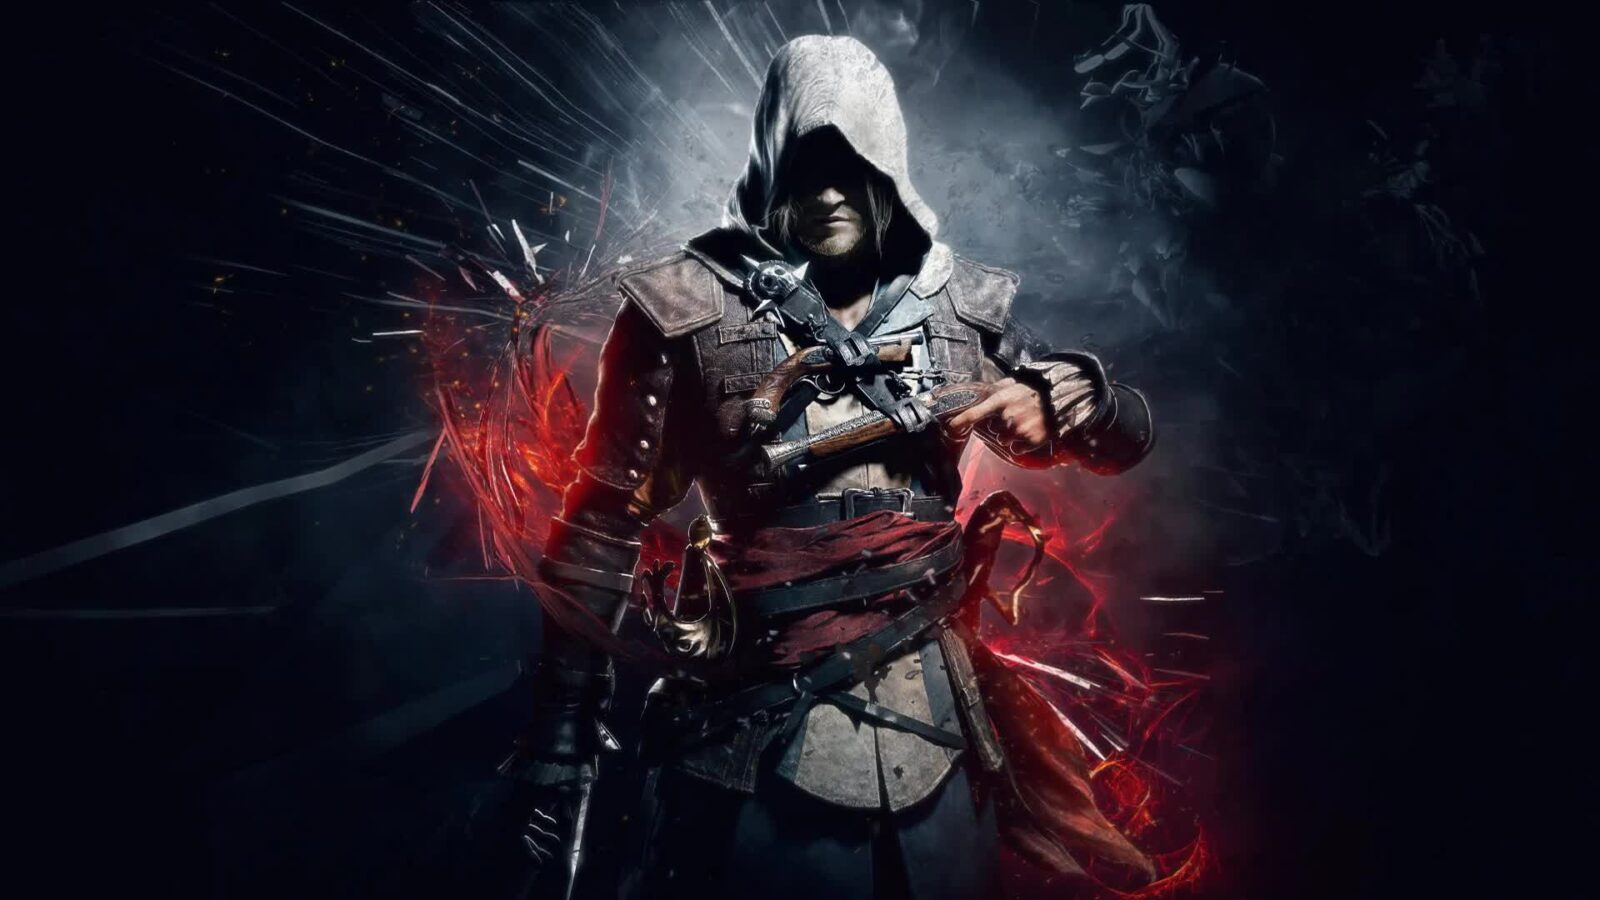 Assassin’s Creed free